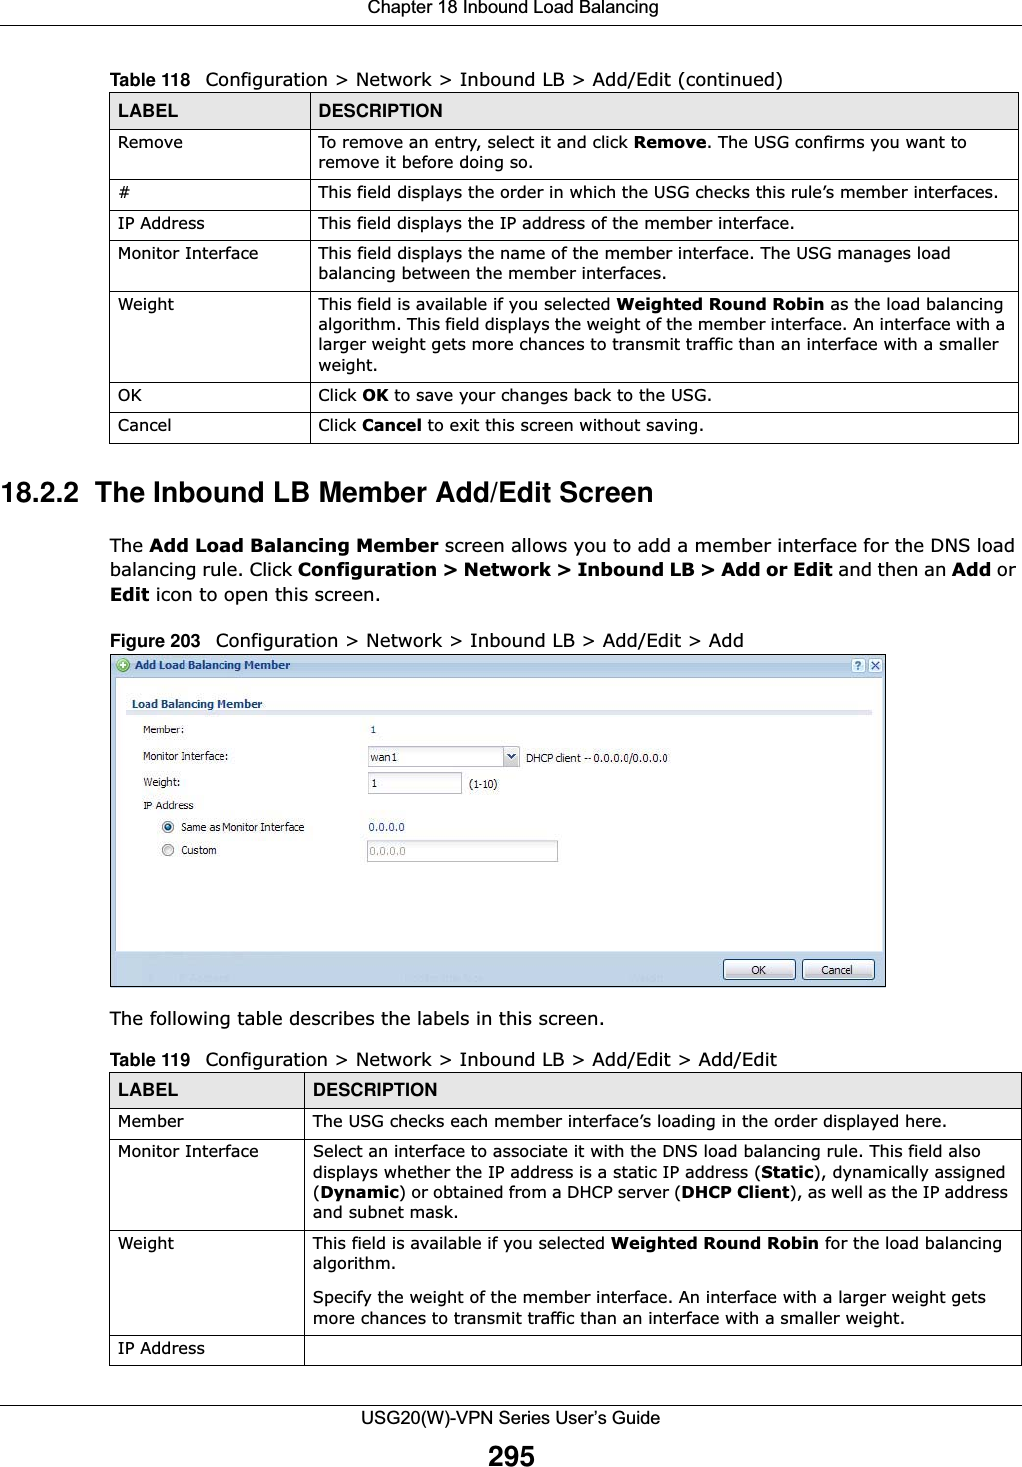  Chapter 18 Inbound Load BalancingUSG20(W)-VPN Series User’s Guide29518.2.2  The Inbound LB Member Add/Edit ScreenThe Add Load Balancing Member screen allows you to add a member interface for the DNS load balancing rule. Click Configuration &gt; Network &gt; Inbound LB &gt; Add or Edit and then an Add or Edit icon to open this screen.Figure 203   Configuration &gt; Network &gt; Inbound LB &gt; Add/Edit &gt; Add The following table describes the labels in this screen. Remove To remove an entry, select it and click Remove. The USG confirms you want to remove it before doing so.# This field displays the order in which the USG checks this rule’s member interfaces.IP Address This field displays the IP address of the member interface.Monitor Interface This field displays the name of the member interface. The USG manages load balancing between the member interfaces.Weight This field is available if you selected Weighted Round Robin as the load balancing algorithm. This field displays the weight of the member interface. An interface with a larger weight gets more chances to transmit traffic than an interface with a smaller weight.OK Click OK to save your changes back to the USG.Cancel Click Cancel to exit this screen without saving.Table 118   Configuration &gt; Network &gt; Inbound LB &gt; Add/Edit (continued)LABEL DESCRIPTIONTable 119   Configuration &gt; Network &gt; Inbound LB &gt; Add/Edit &gt; Add/EditLABEL DESCRIPTIONMember The USG checks each member interface’s loading in the order displayed here.Monitor Interface Select an interface to associate it with the DNS load balancing rule. This field also displays whether the IP address is a static IP address (Static), dynamically assigned (Dynamic) or obtained from a DHCP server (DHCP Client), as well as the IP address and subnet mask.Weight This field is available if you selected Weighted Round Robin for the load balancing algorithm. Specify the weight of the member interface. An interface with a larger weight gets more chances to transmit traffic than an interface with a smaller weight.IP Address